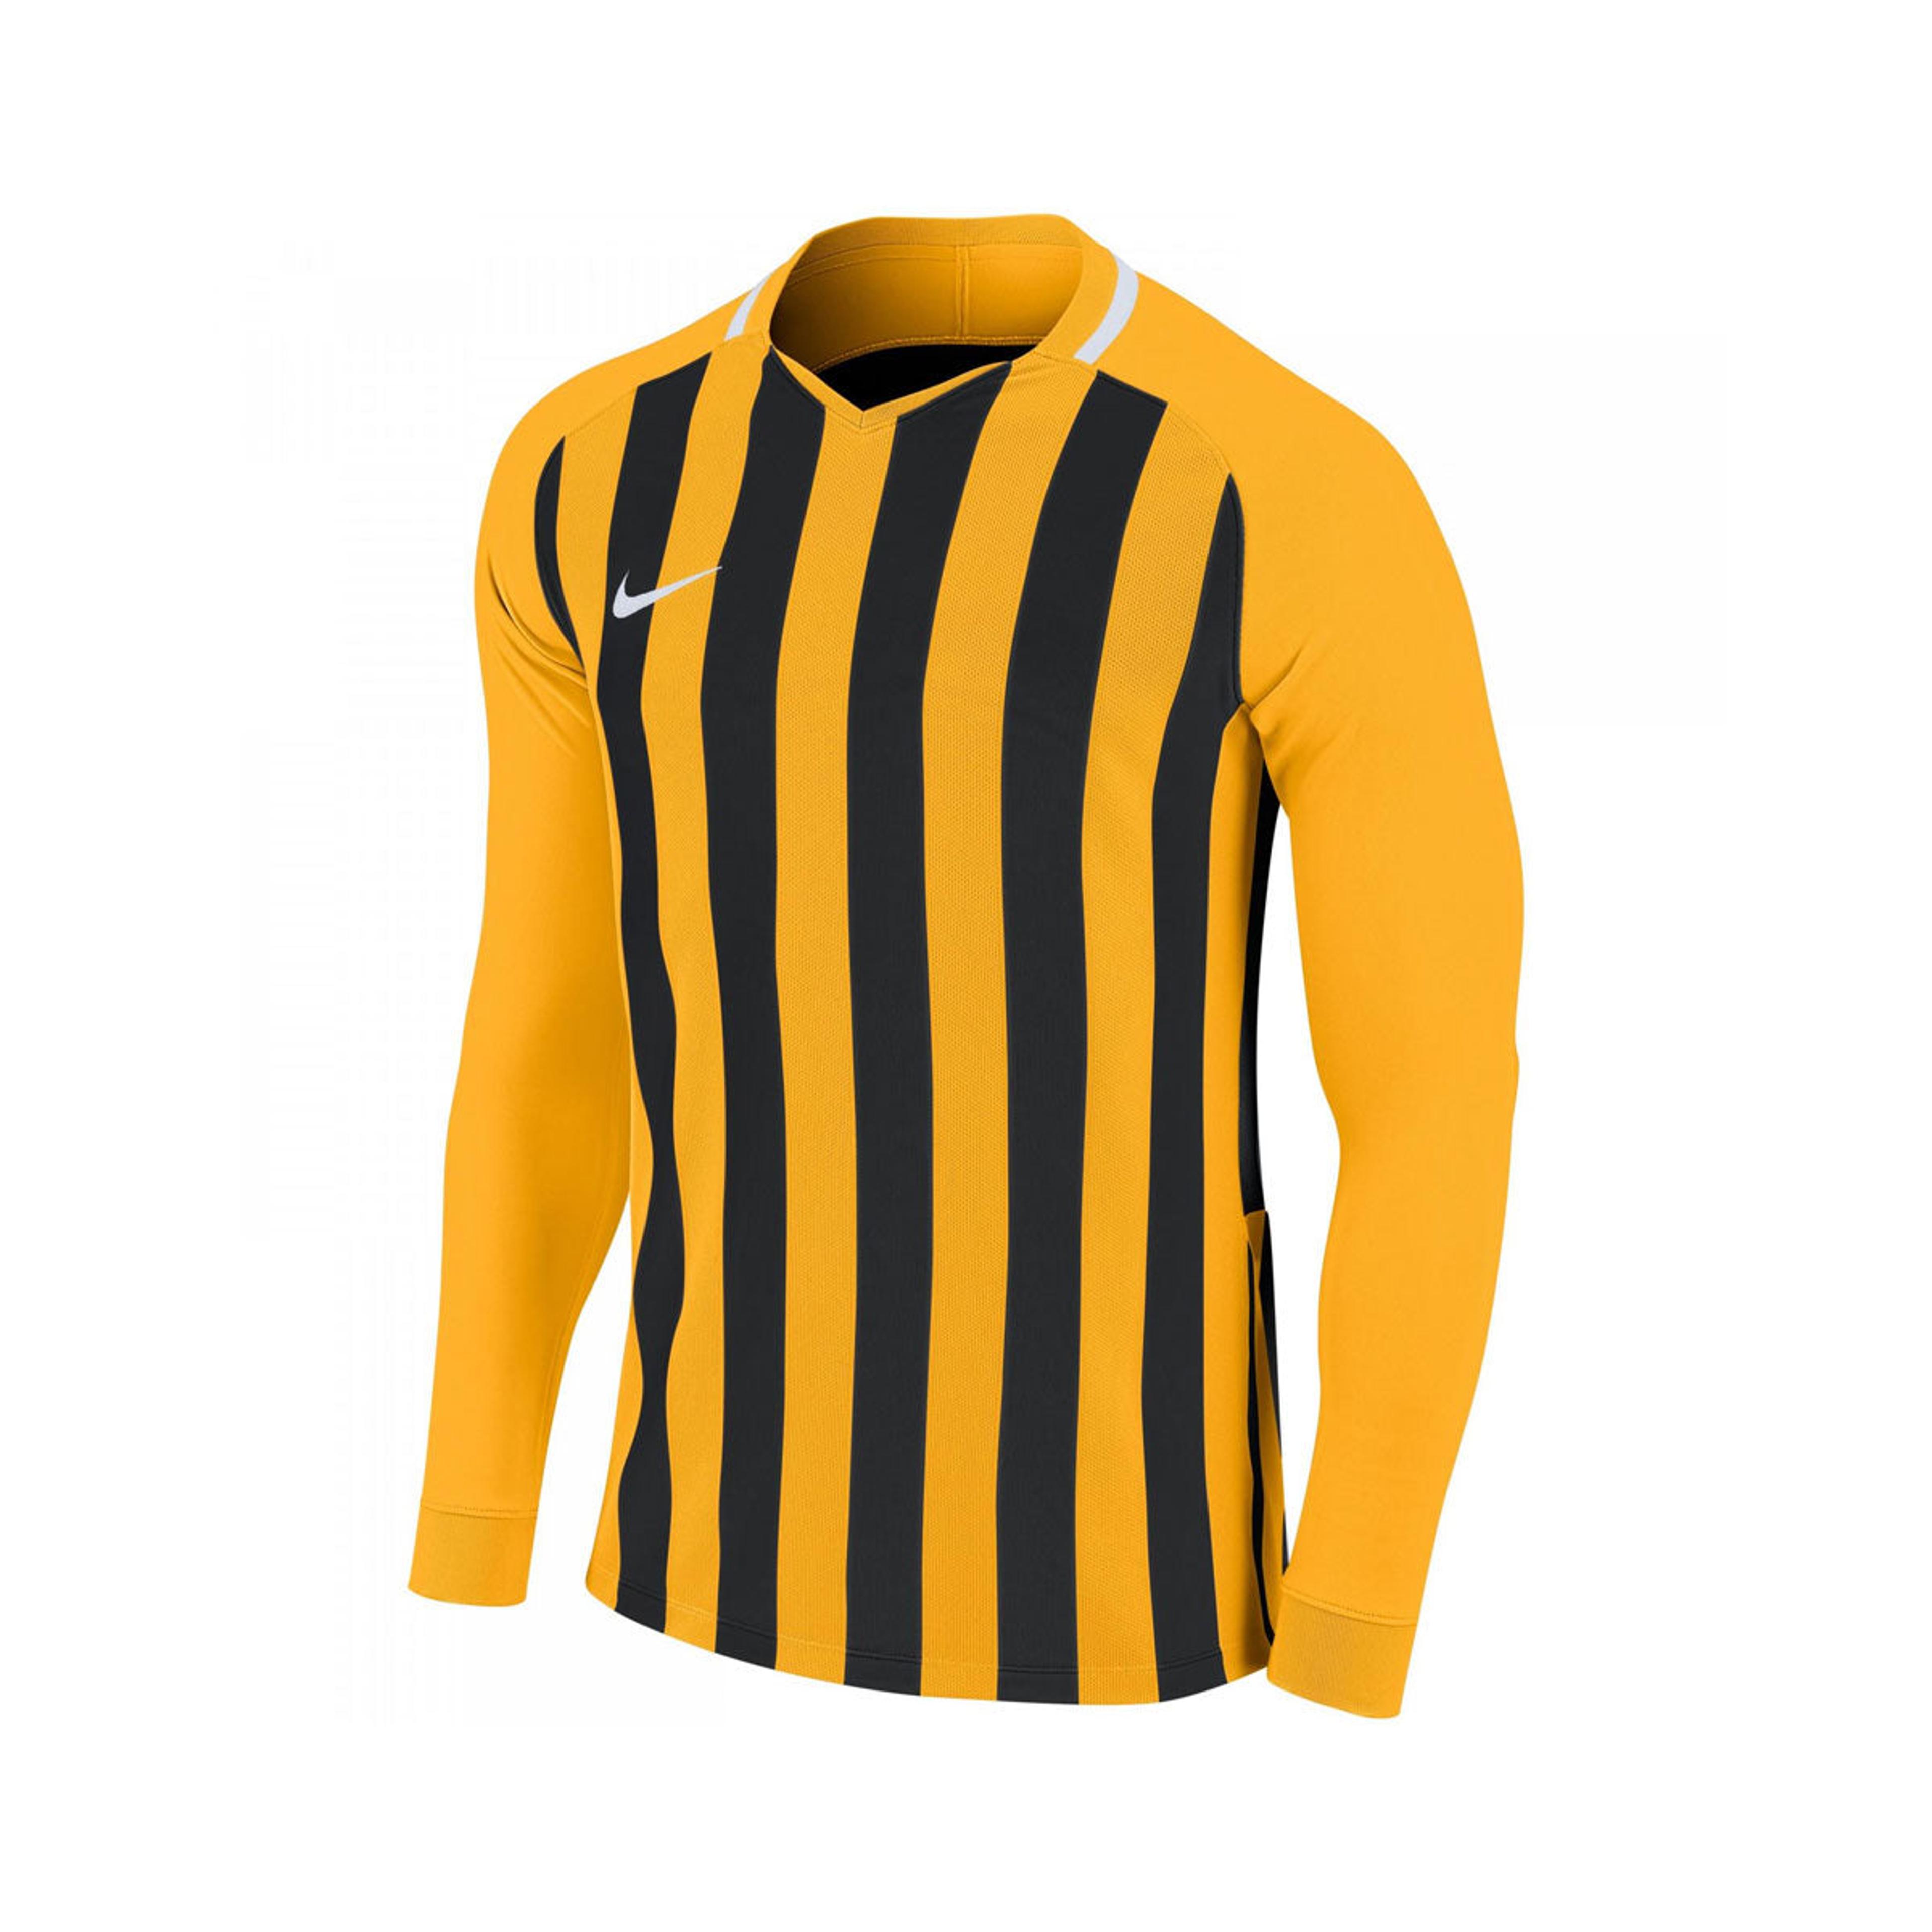 Nike Boy's Striped Division LS Jersey